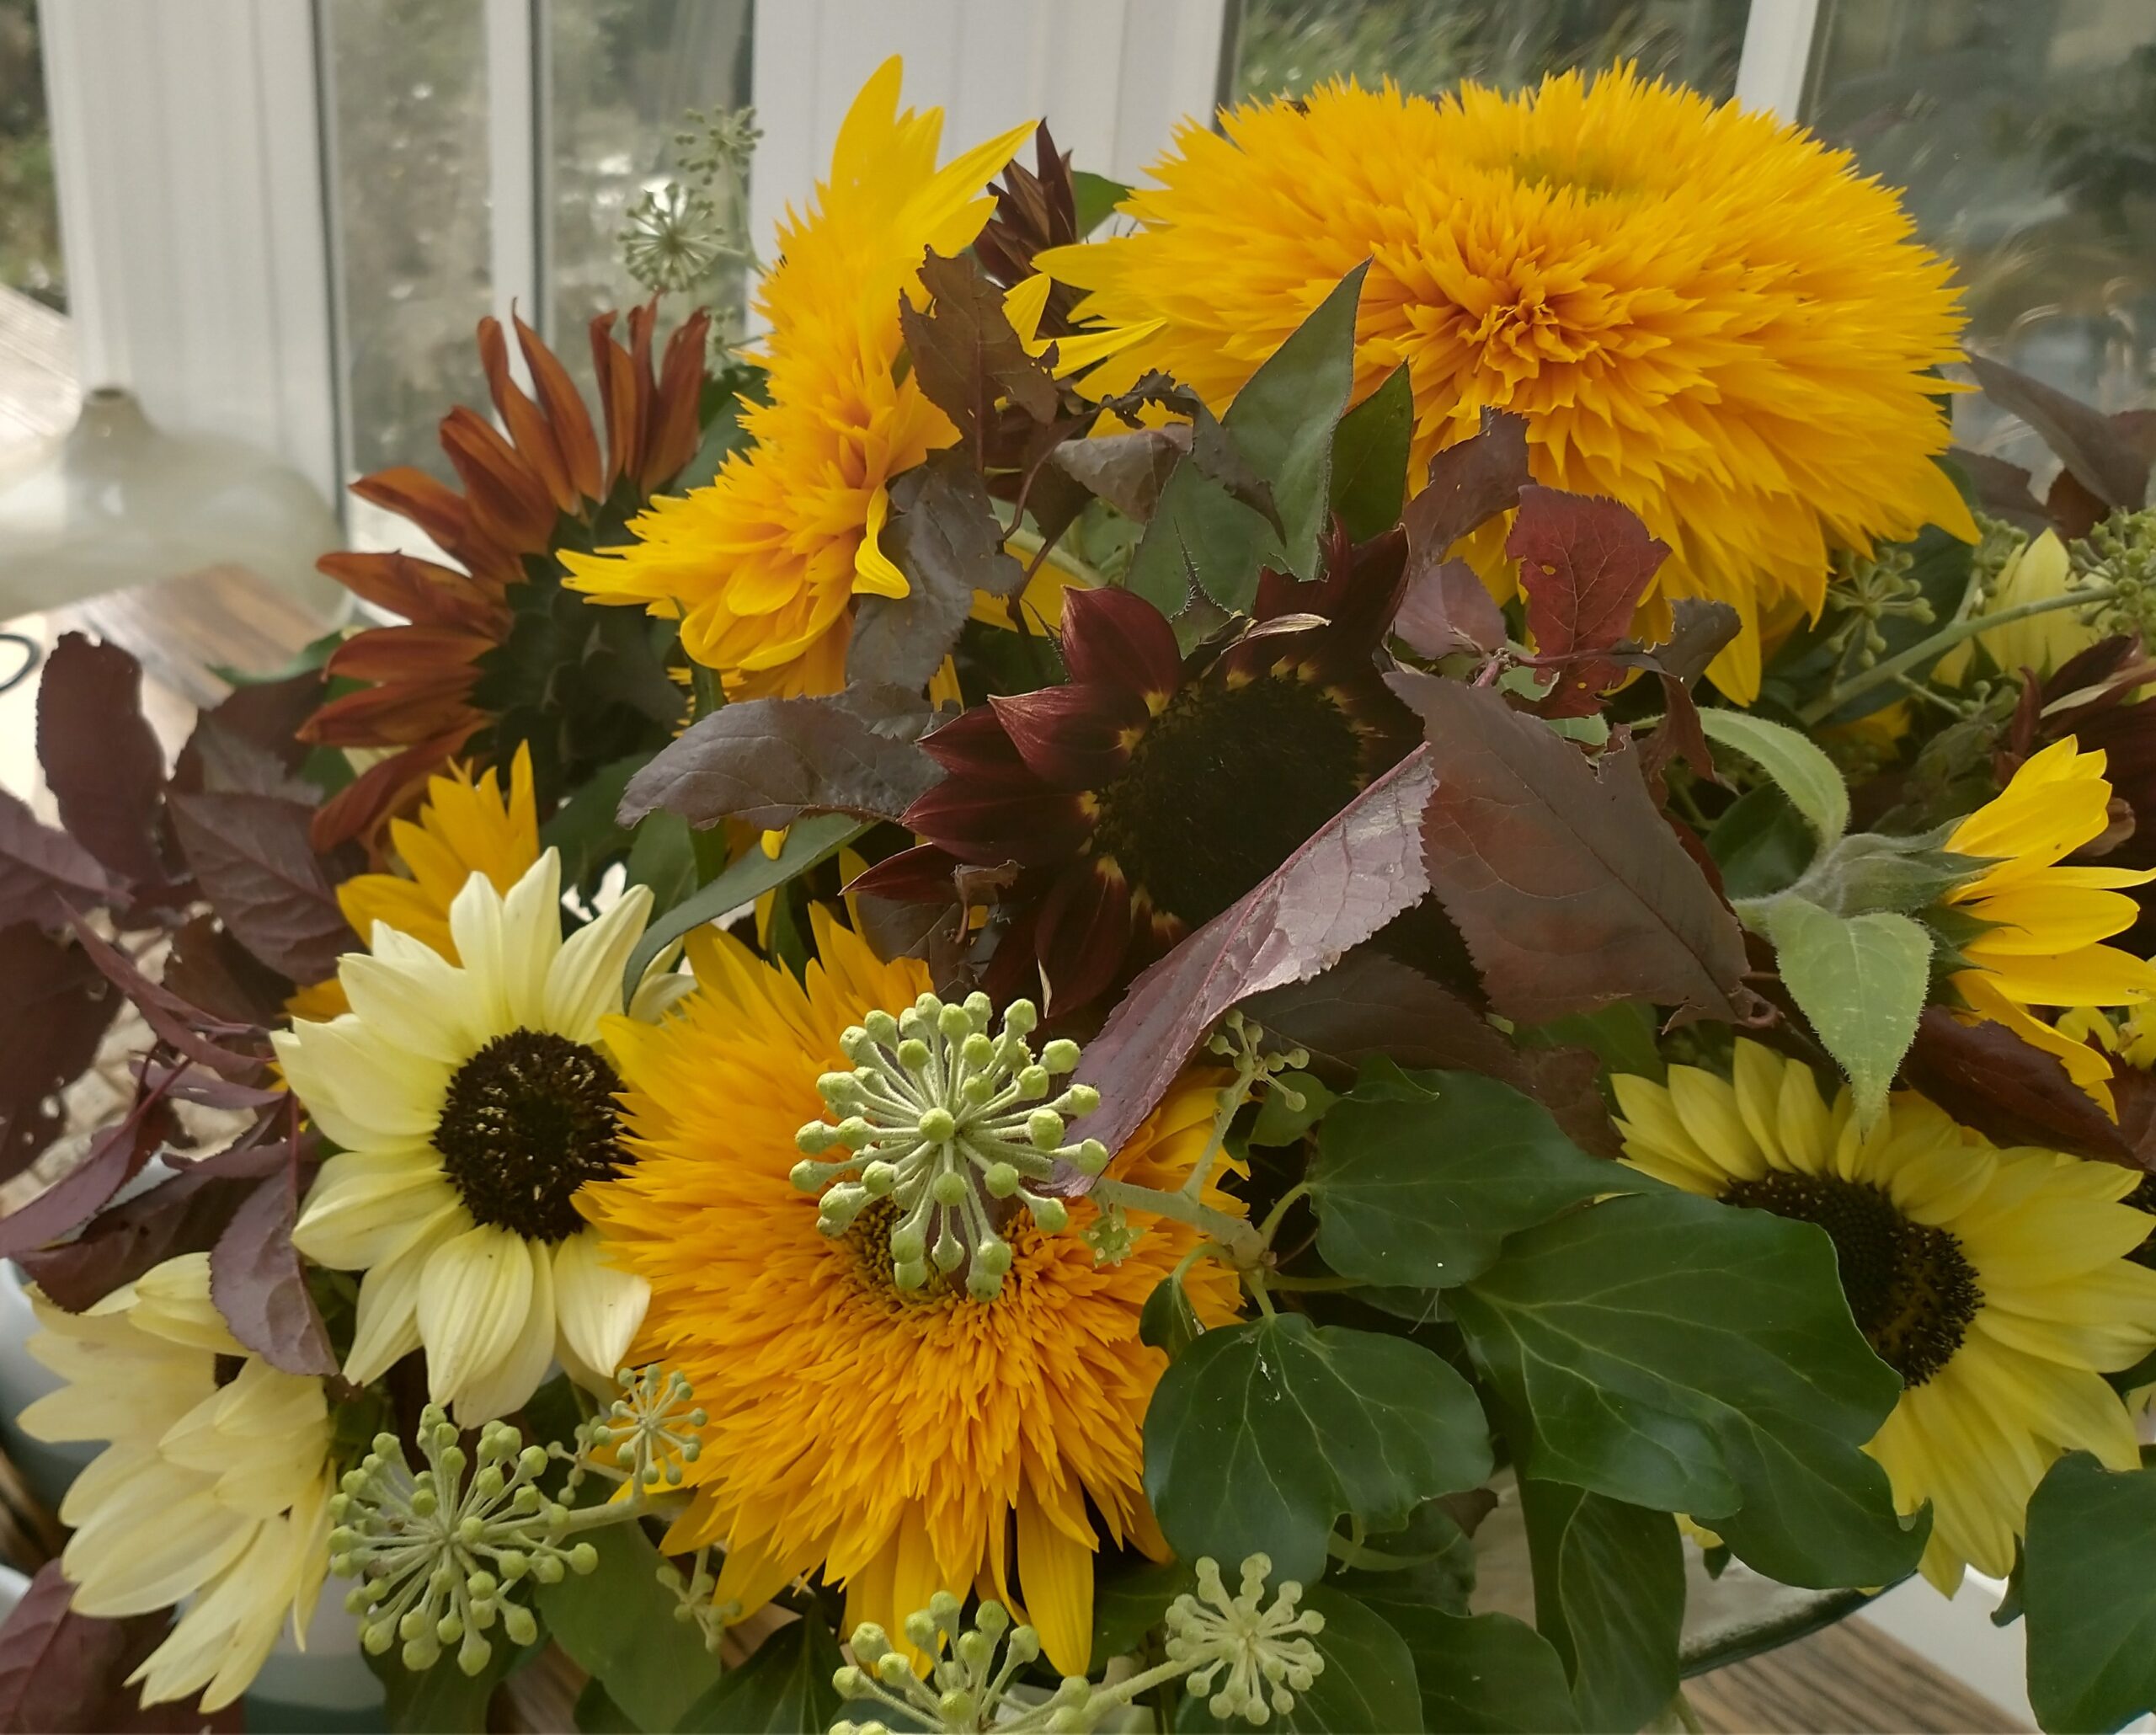 Would you like some local, sustainably grown and beautiful sunflowers for you business next year?